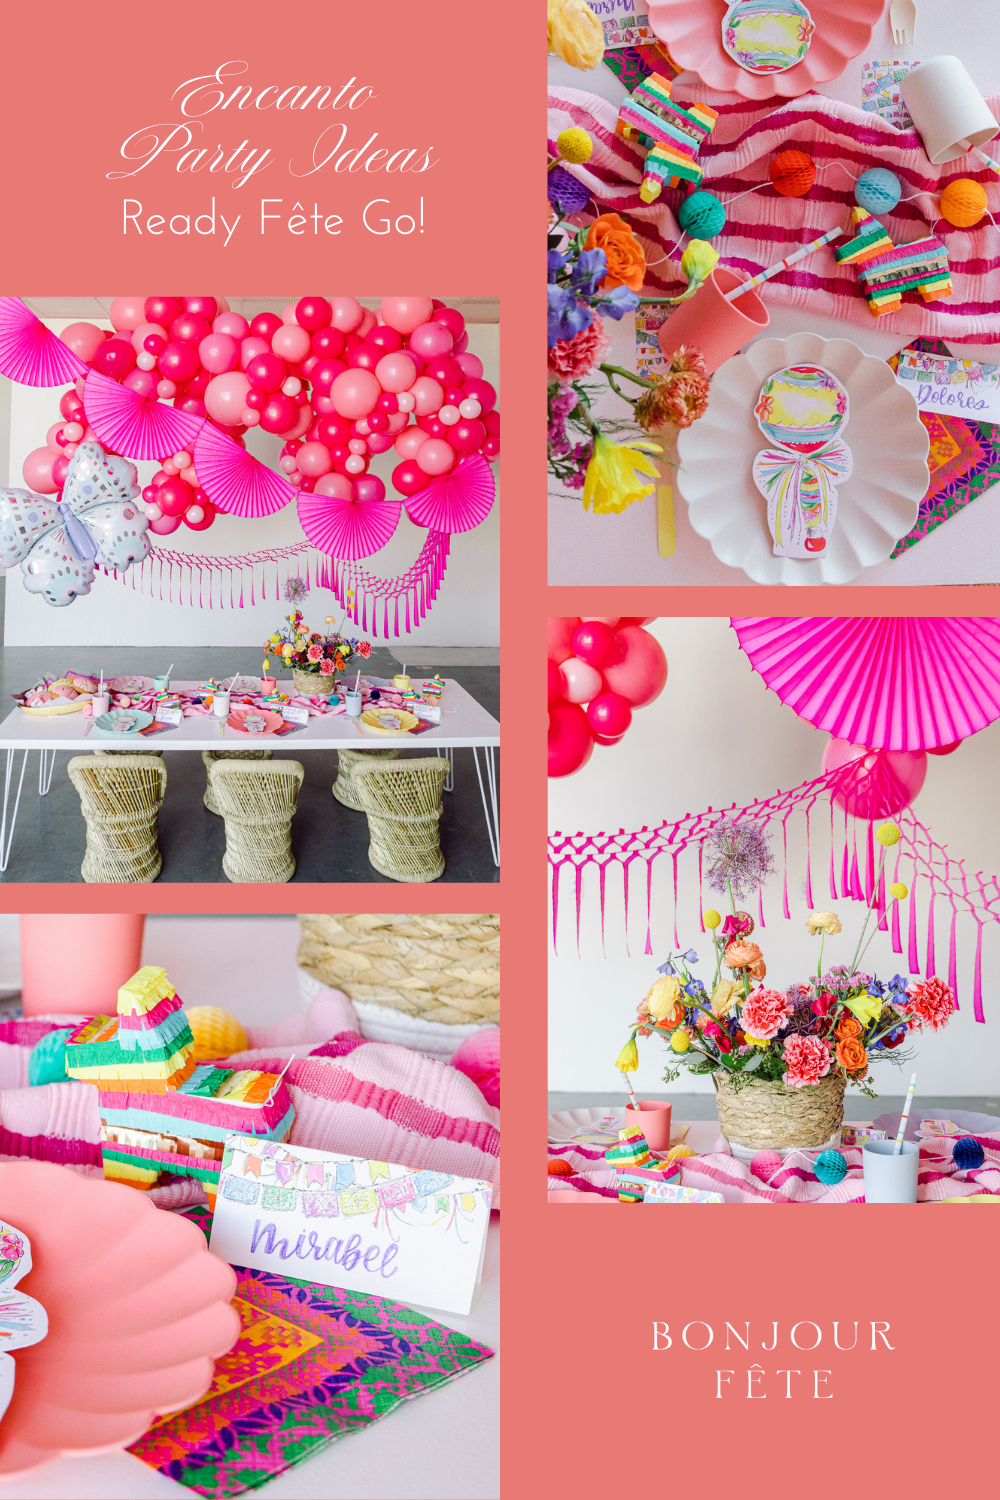 Encanto birthday party ideas and butterfly theme party.